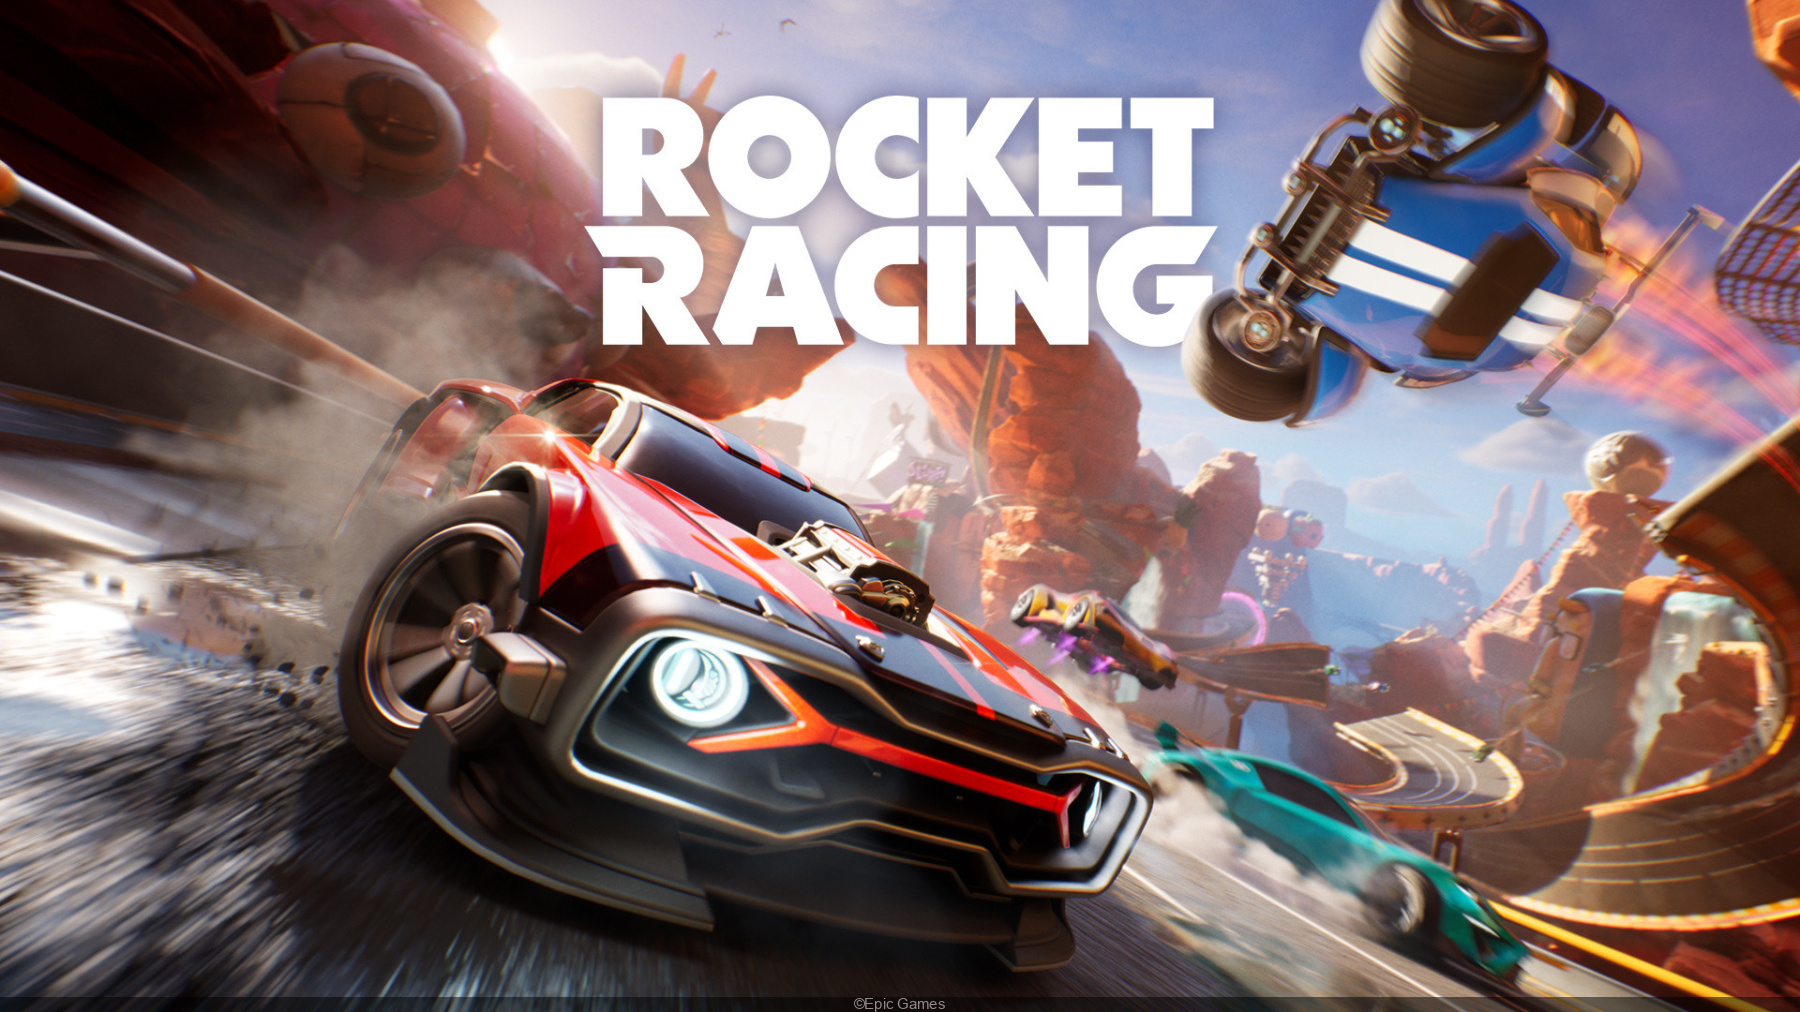 Rocket Royale – Download & Play For Free Here